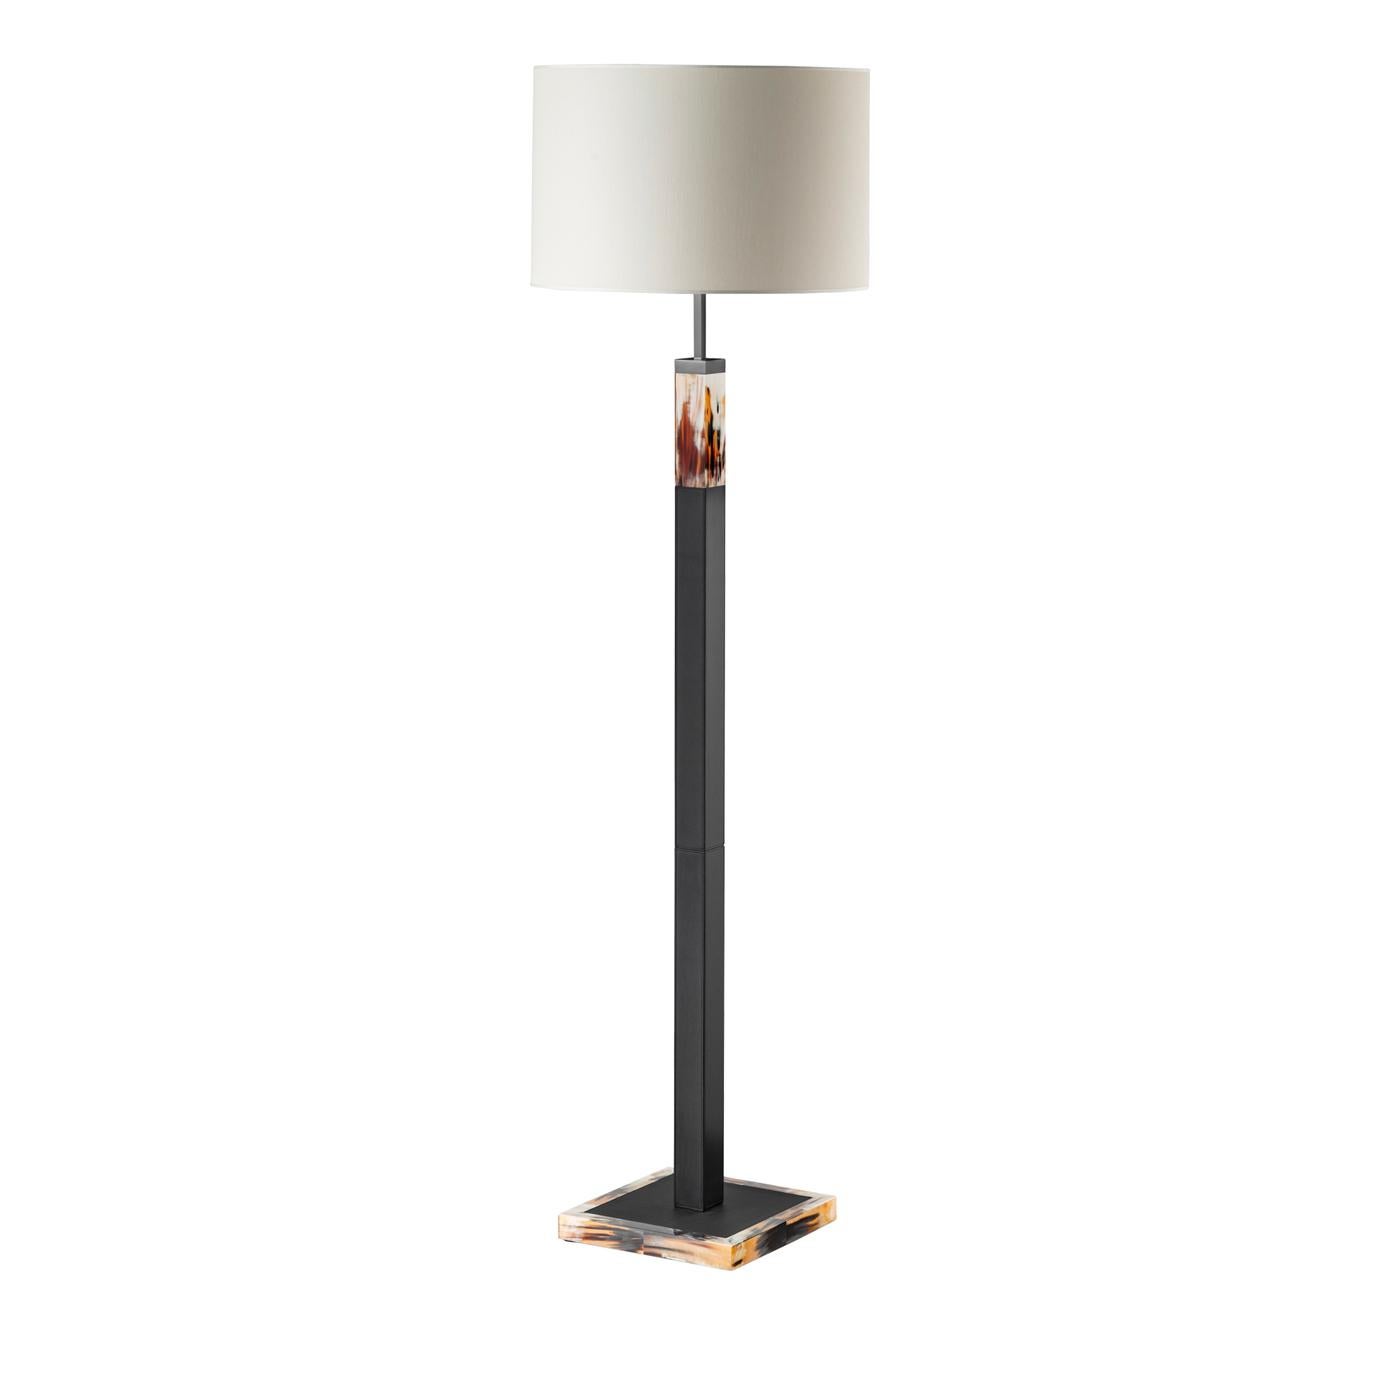 Elegant and timeless, the design of this floor lamp plays with pure geometric elements to create a splendid effect in any modern interior. Luxurious and stately, it features a slender, gunmetal brass stem rising from a sturdy, square base in the